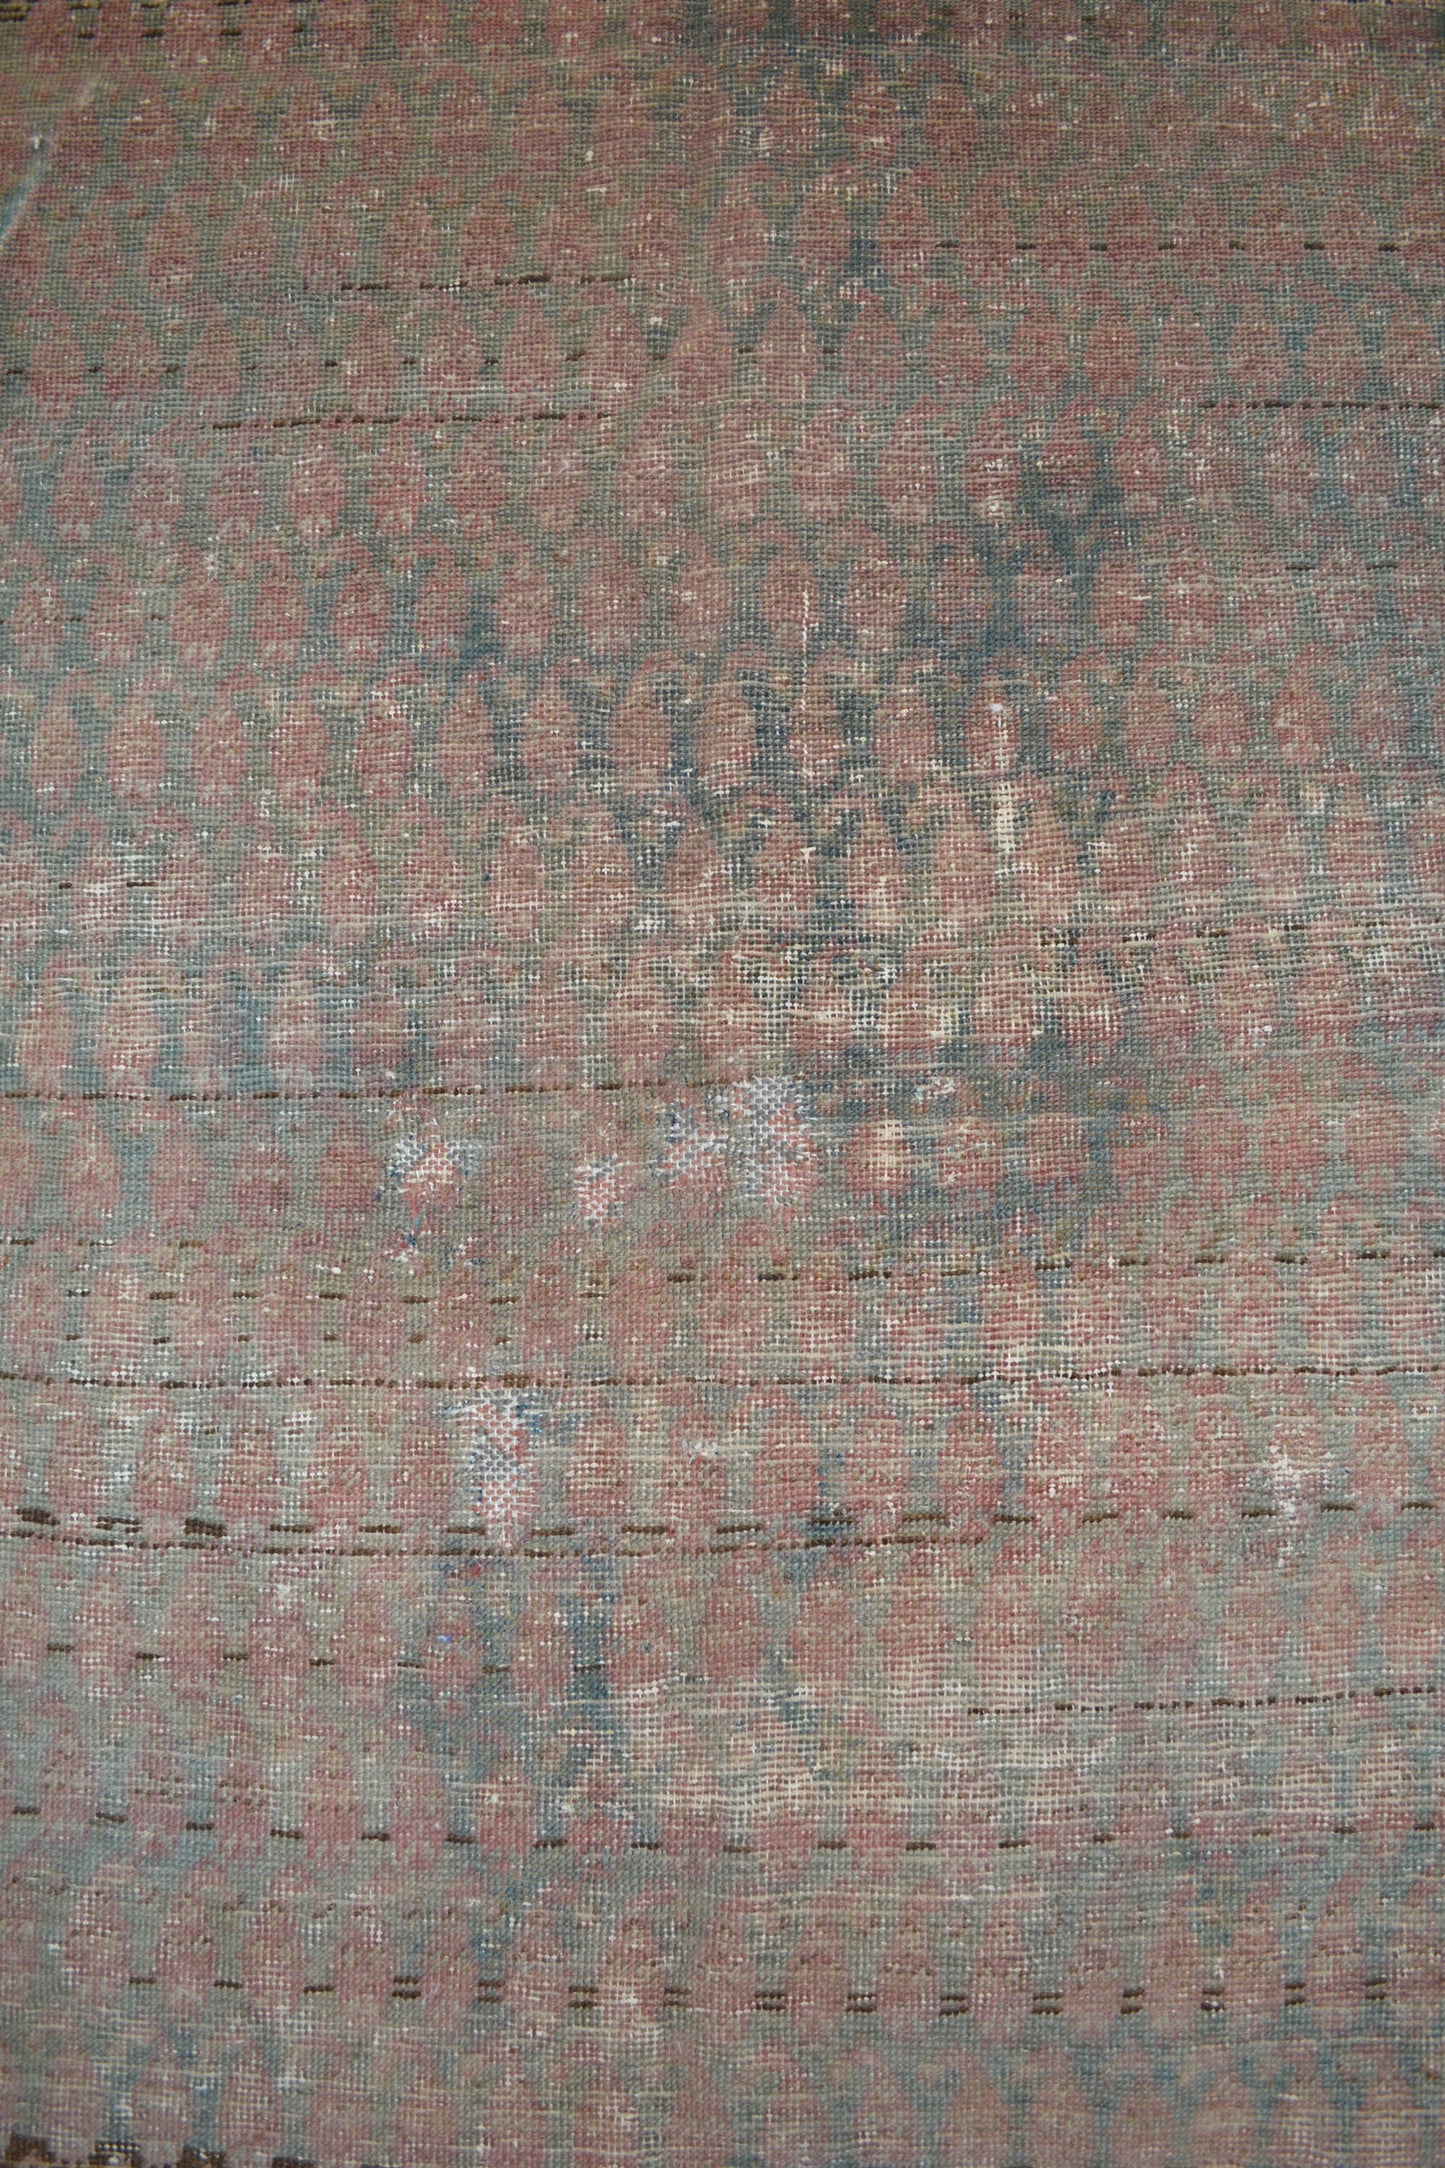 The close up of the center shows a flamingo shape pattern in dark pink.